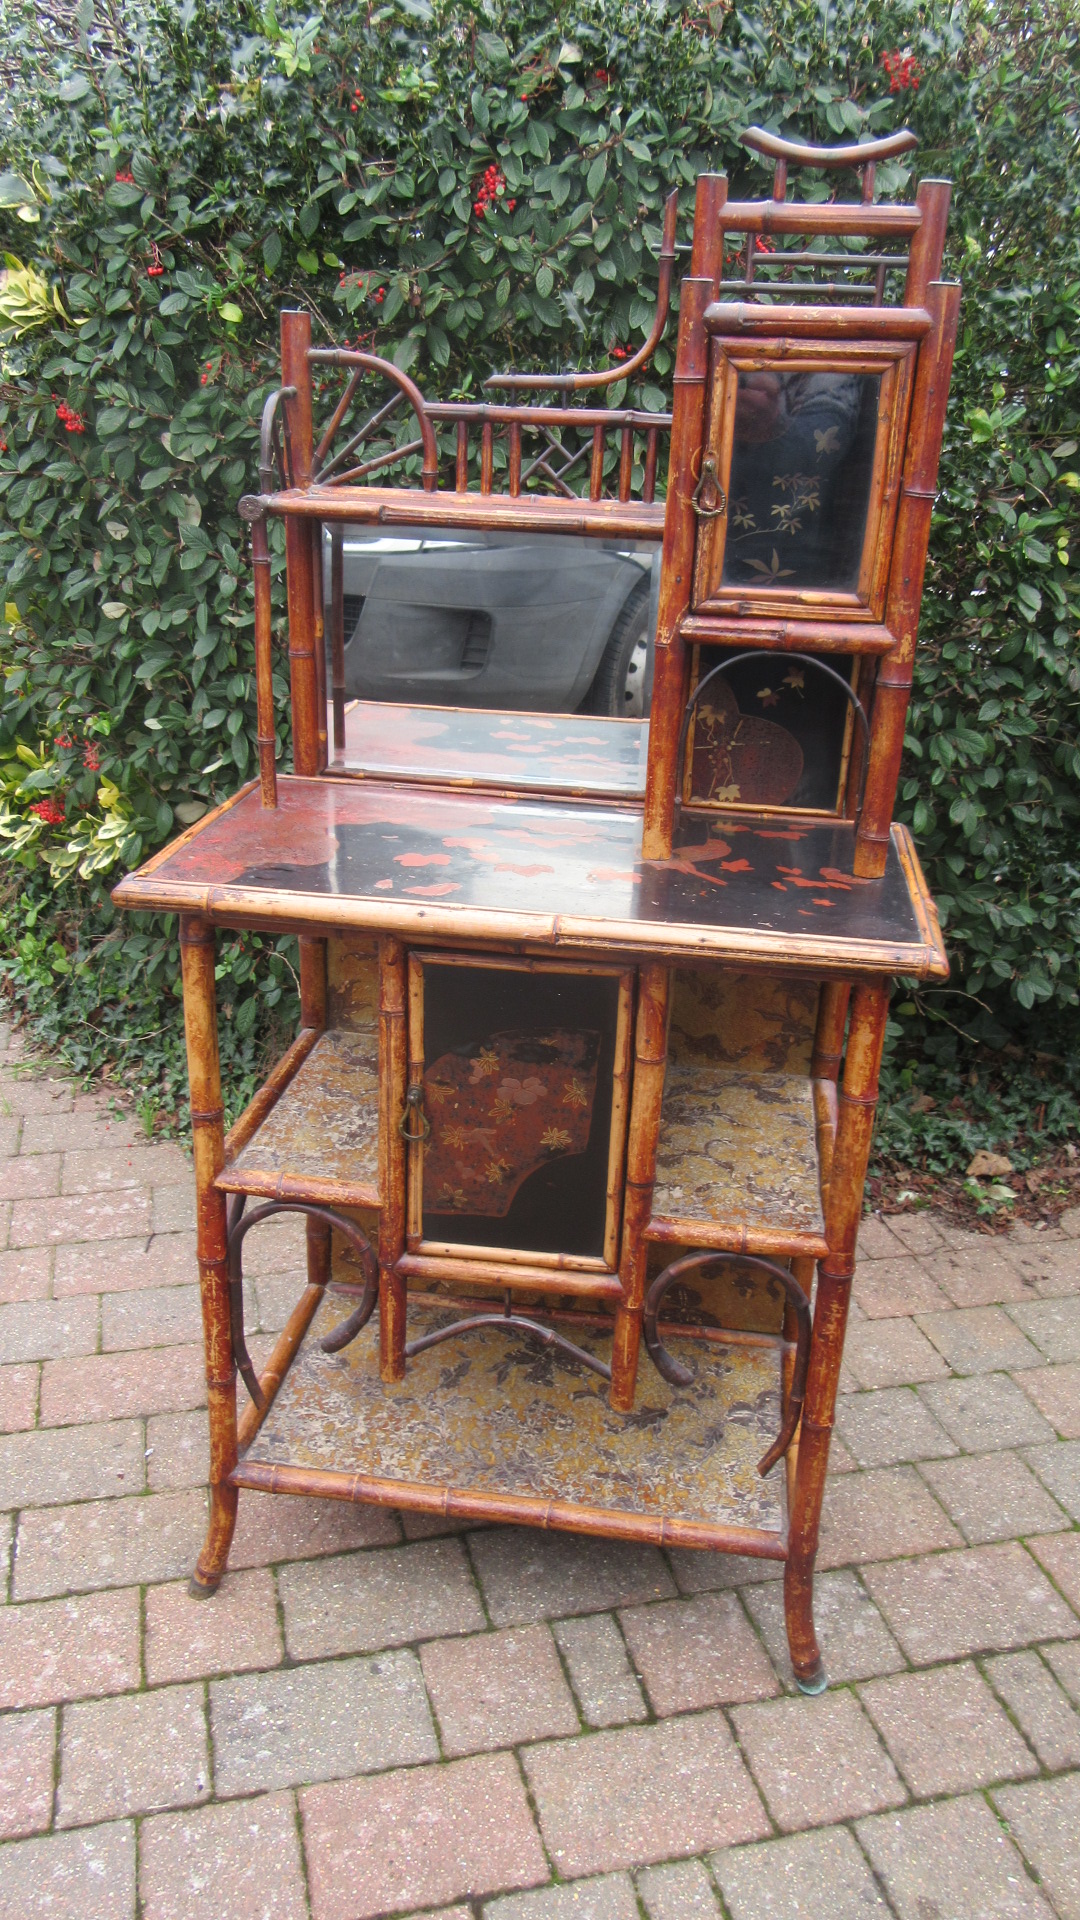 GOOD QUALITY ANTIQUE BAMBOO CABINET